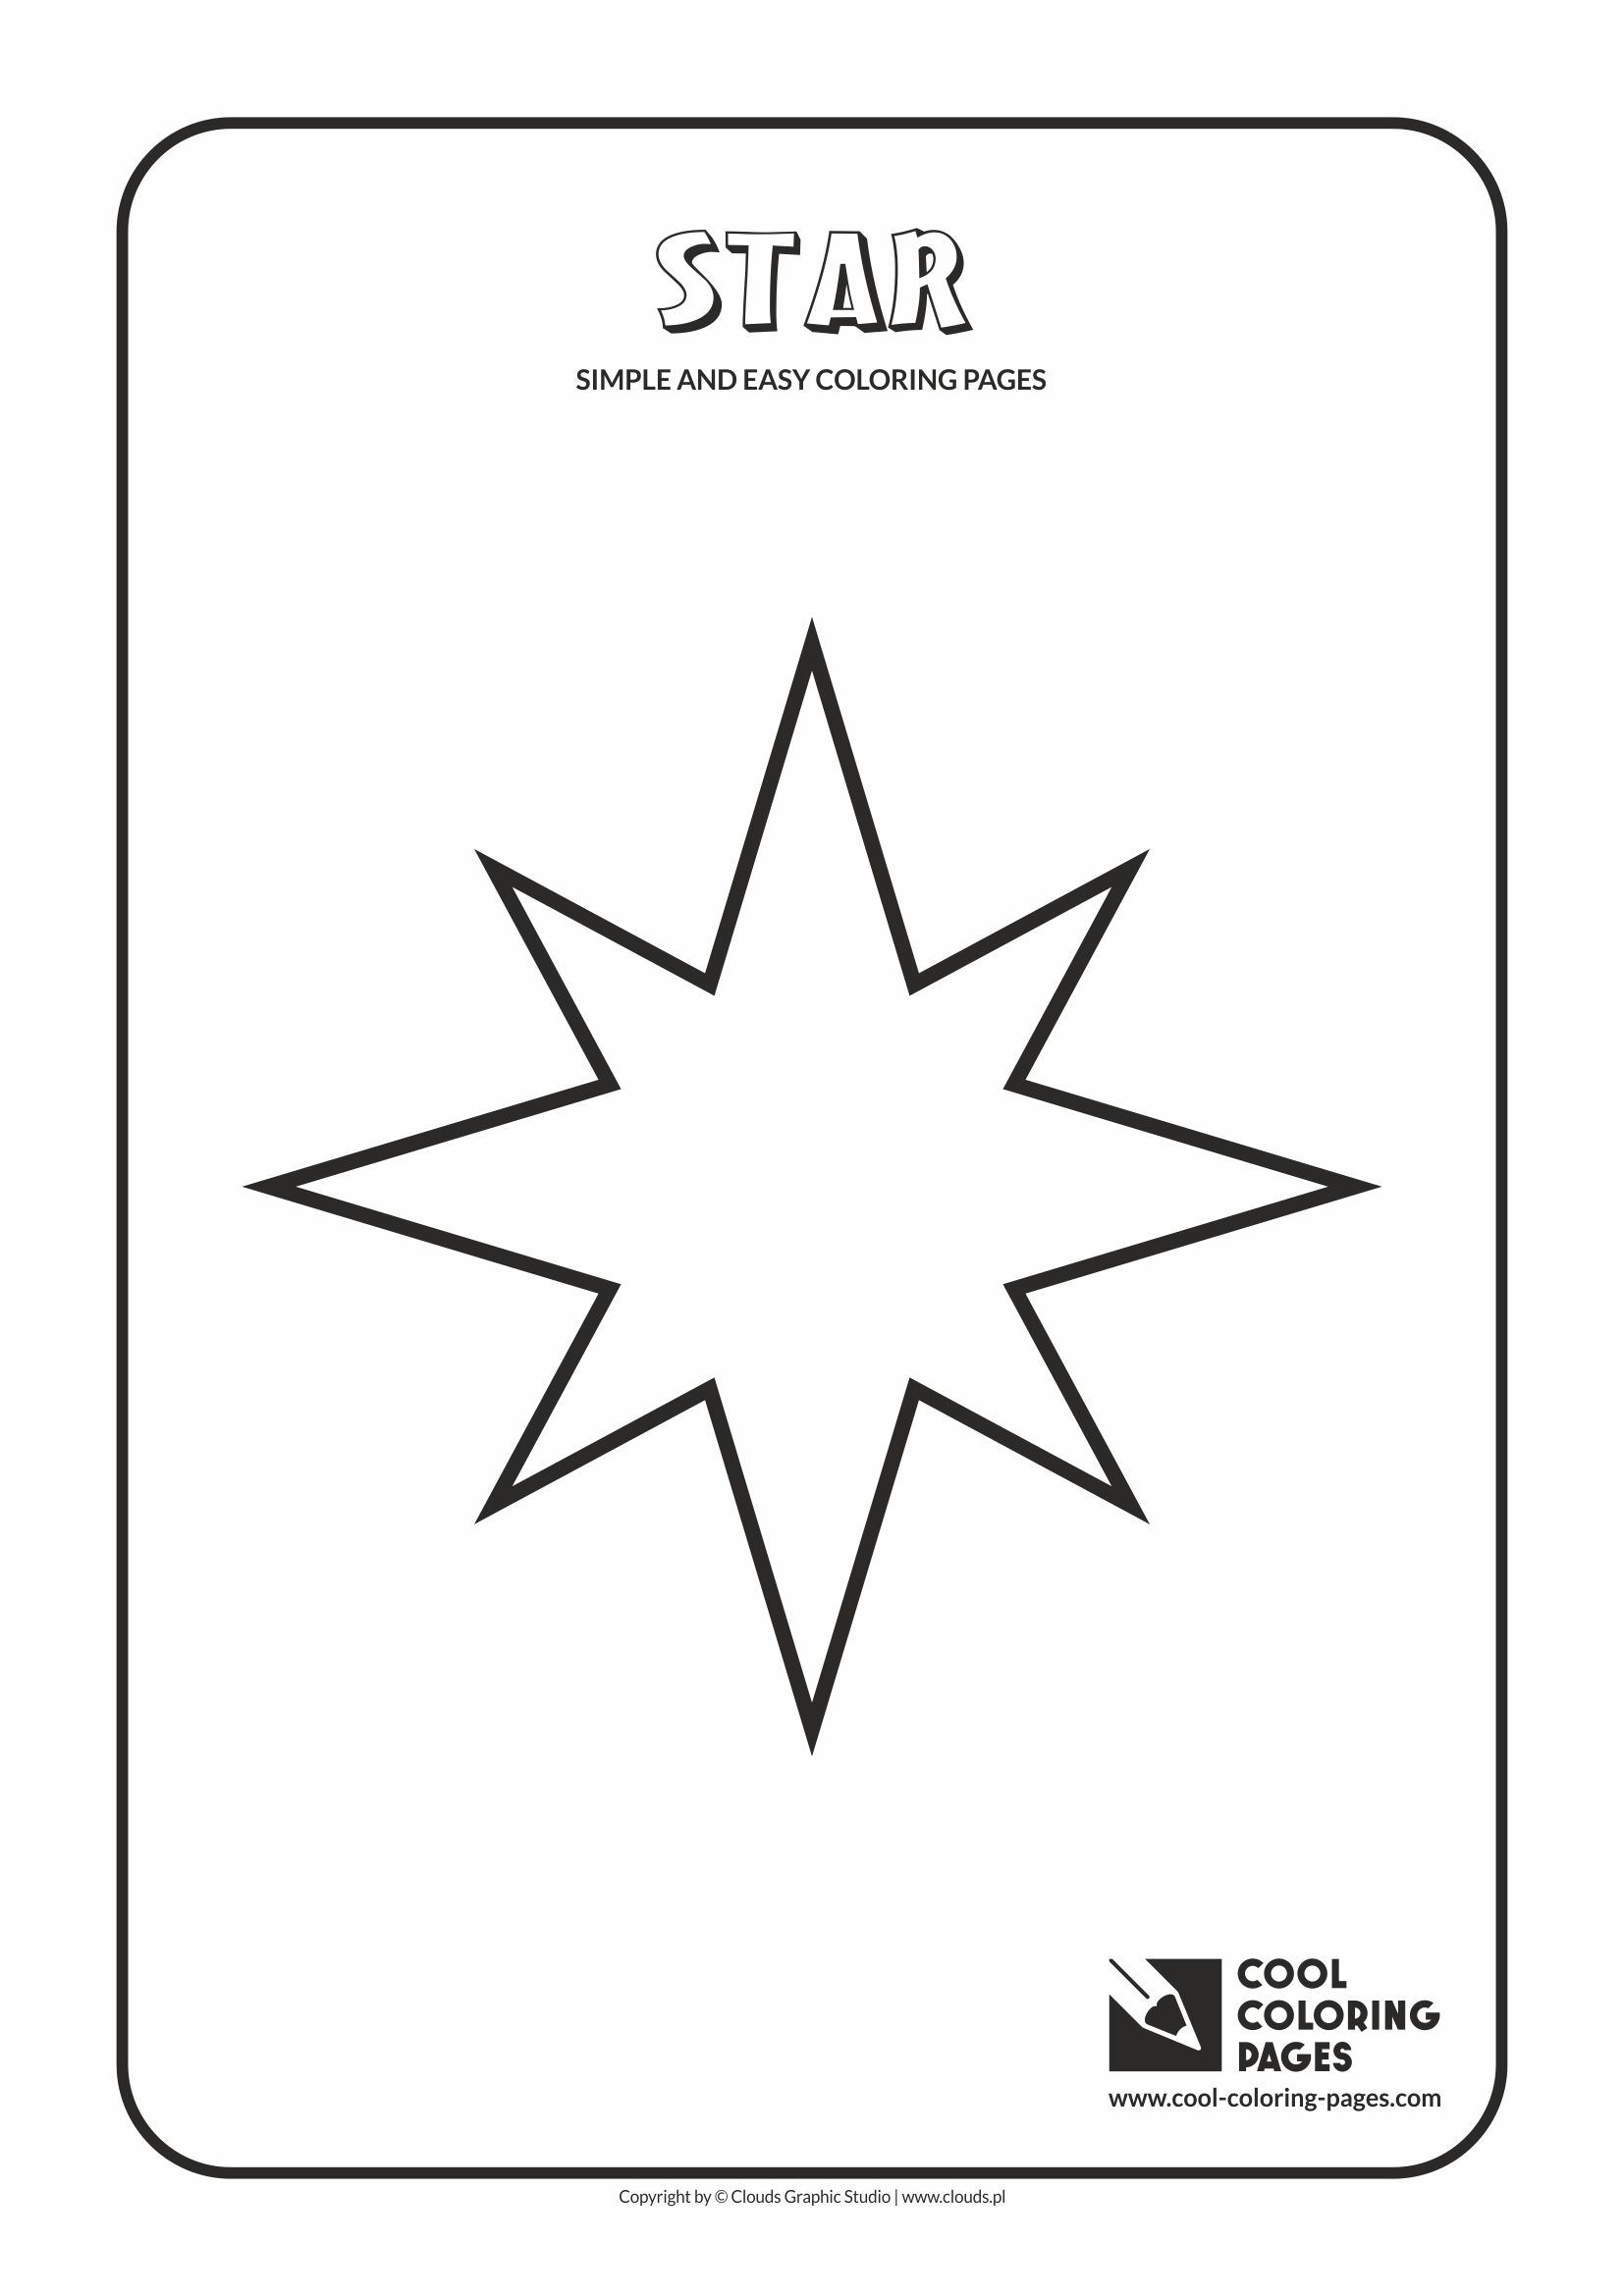 Simple and easy coloring pages for toddlers - Star